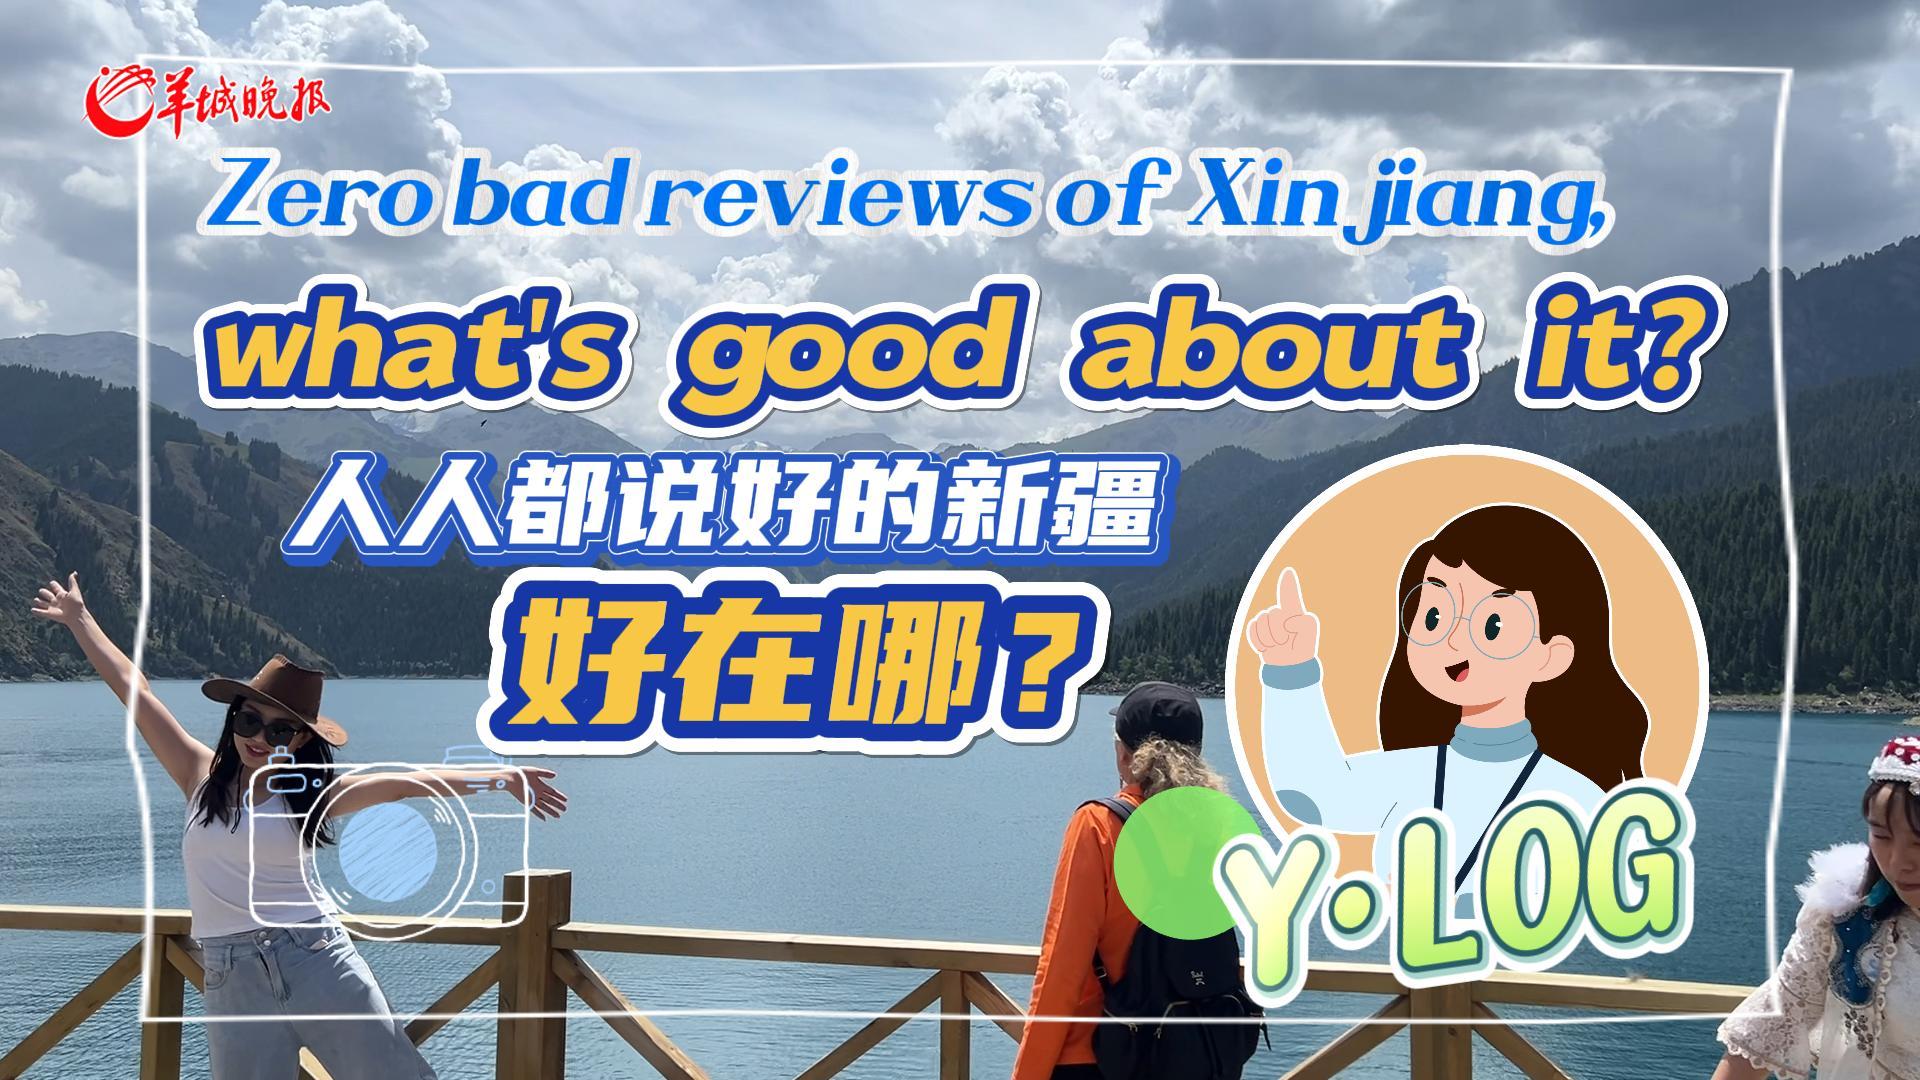 Zero bad review of Xinjiang, what's good about it?